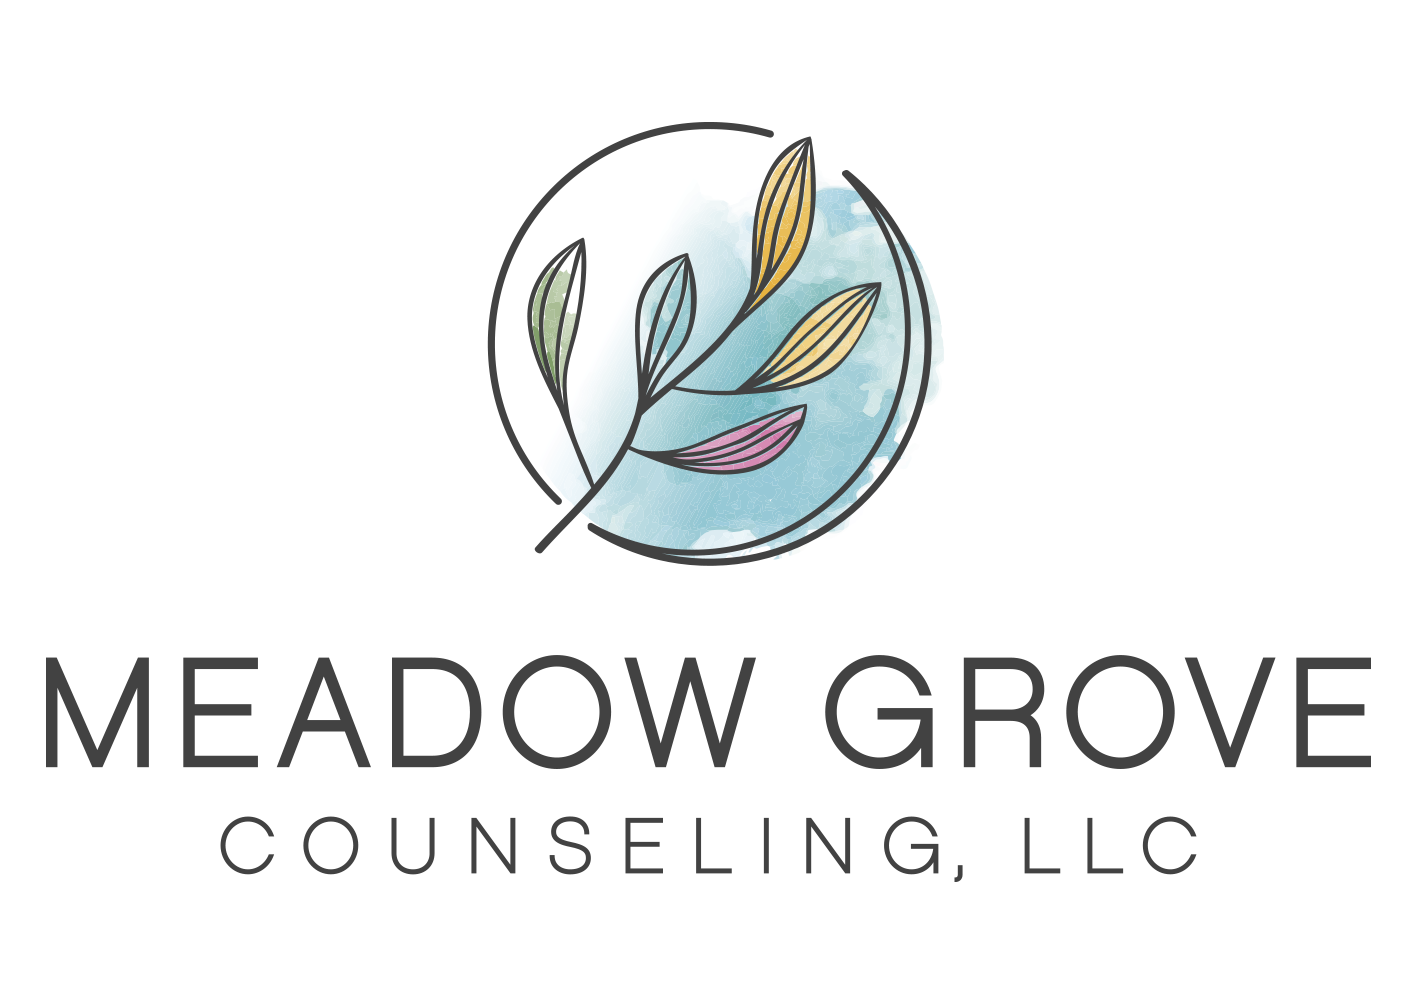 Meadow Grove Counseling, LLC